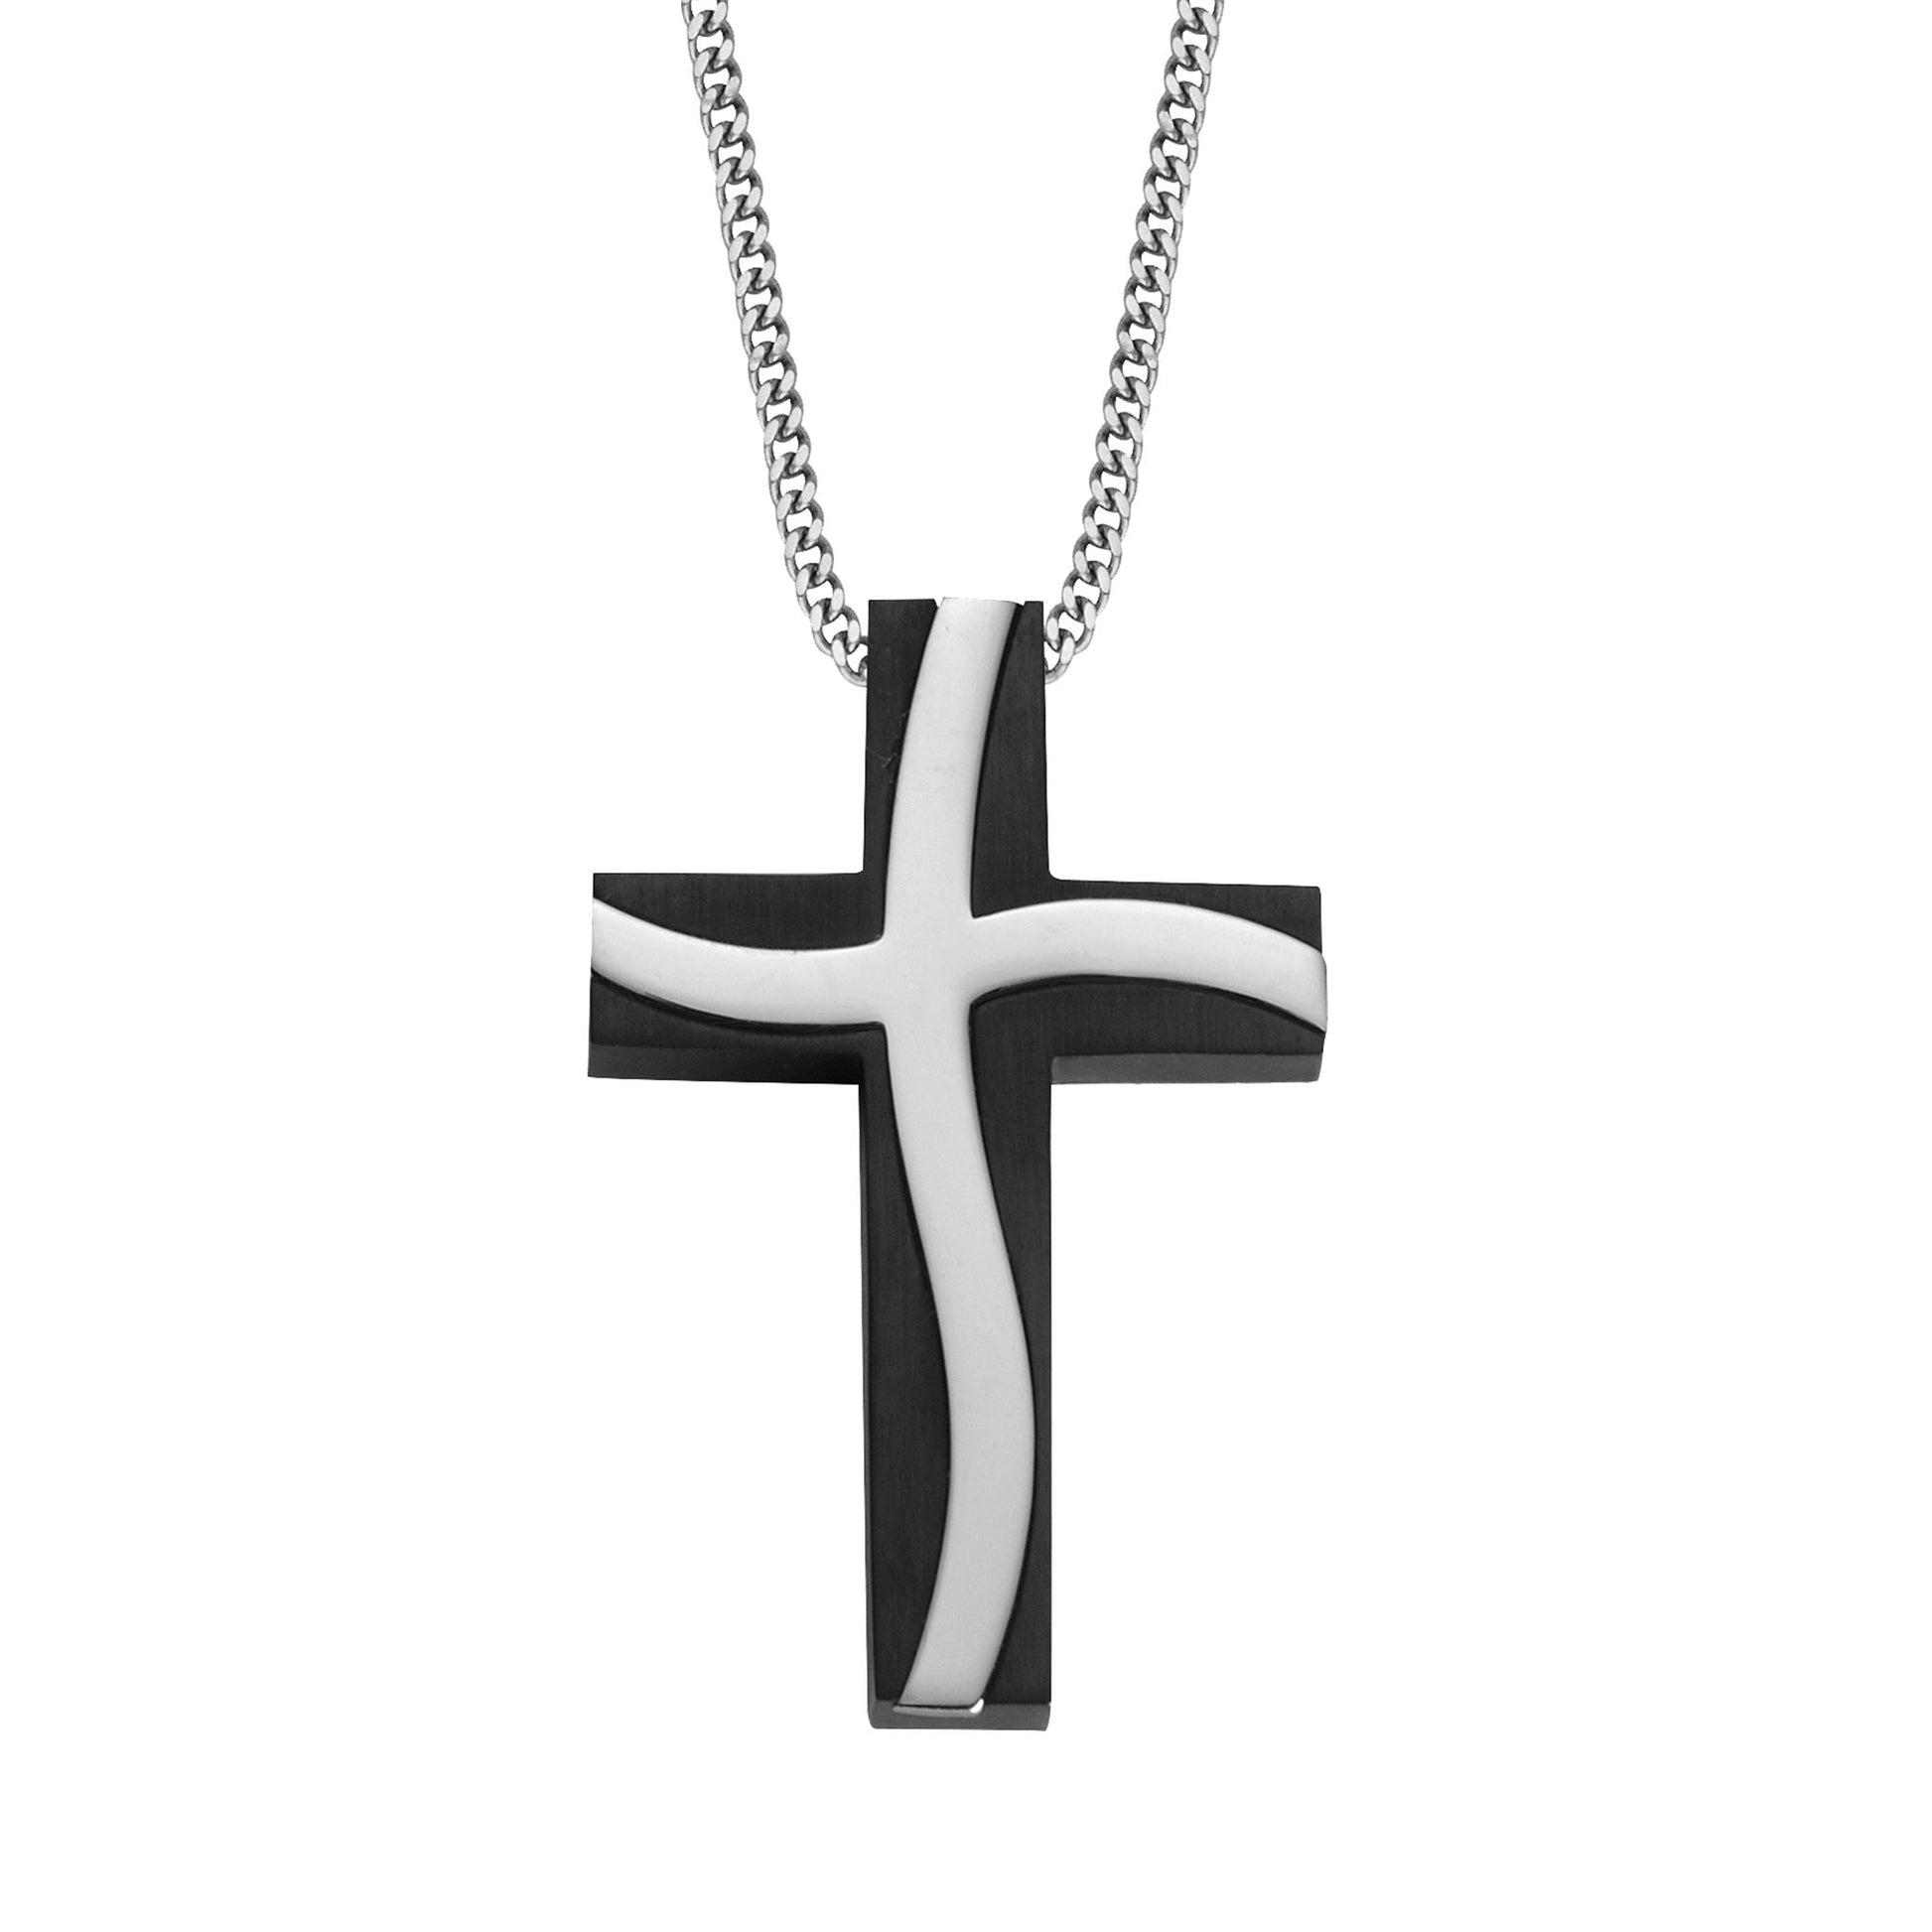 A stainless steel & black wavy cross necklace displayed on a neutral white background.